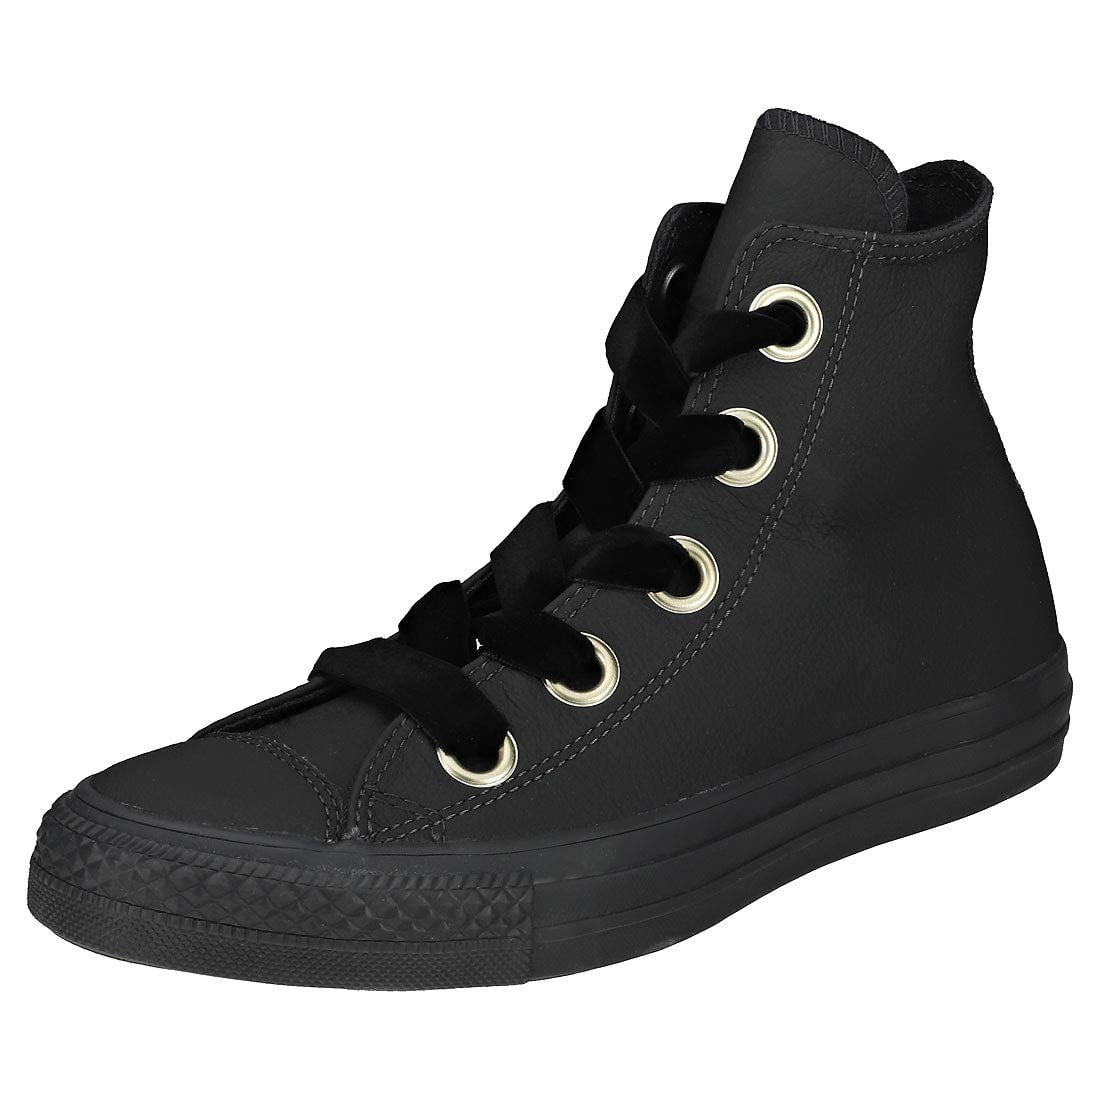 converse leather gold eyelets